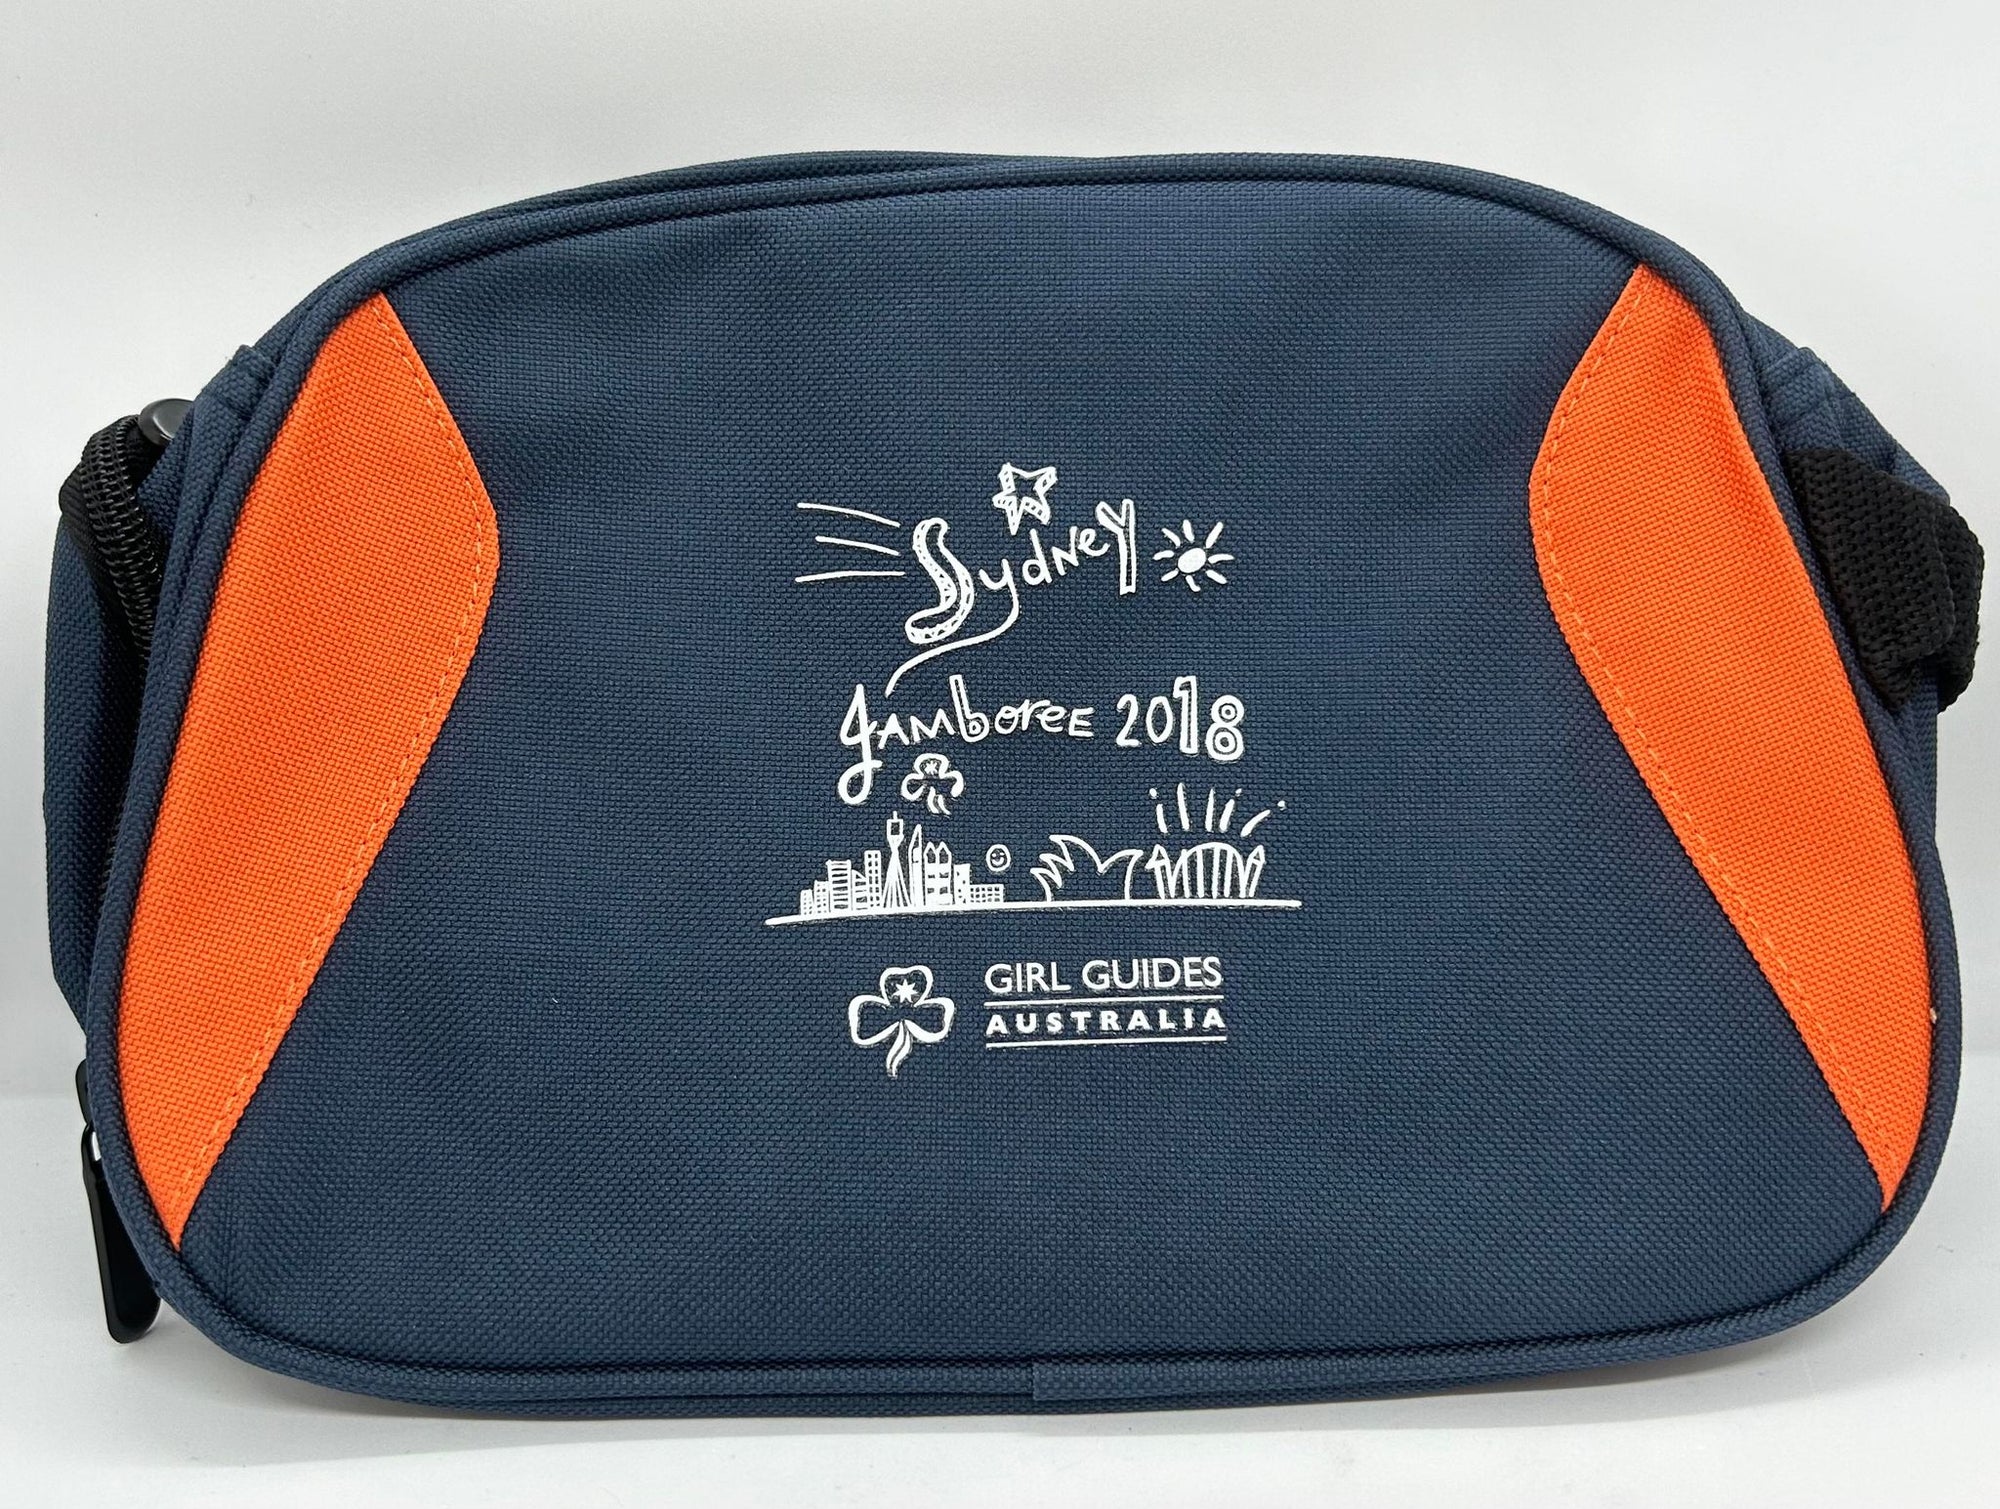 a small navy toiletry bag with the jamboree logo on the front and orange panels down the sides